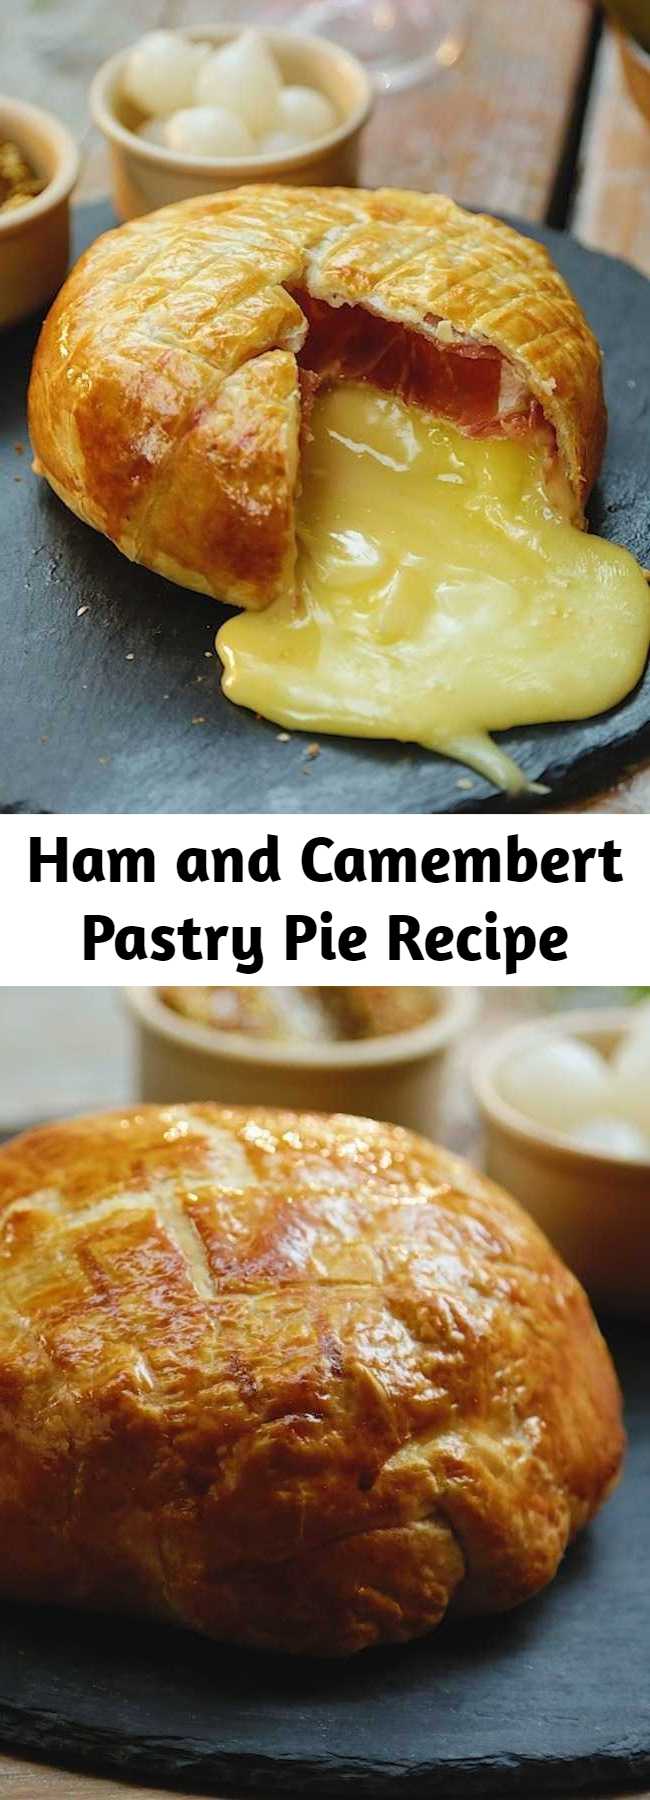 Ham and Camembert Pastry Pie Recipe - This ham and pastry pie is the perfect cheesy dish for any cheese lover!